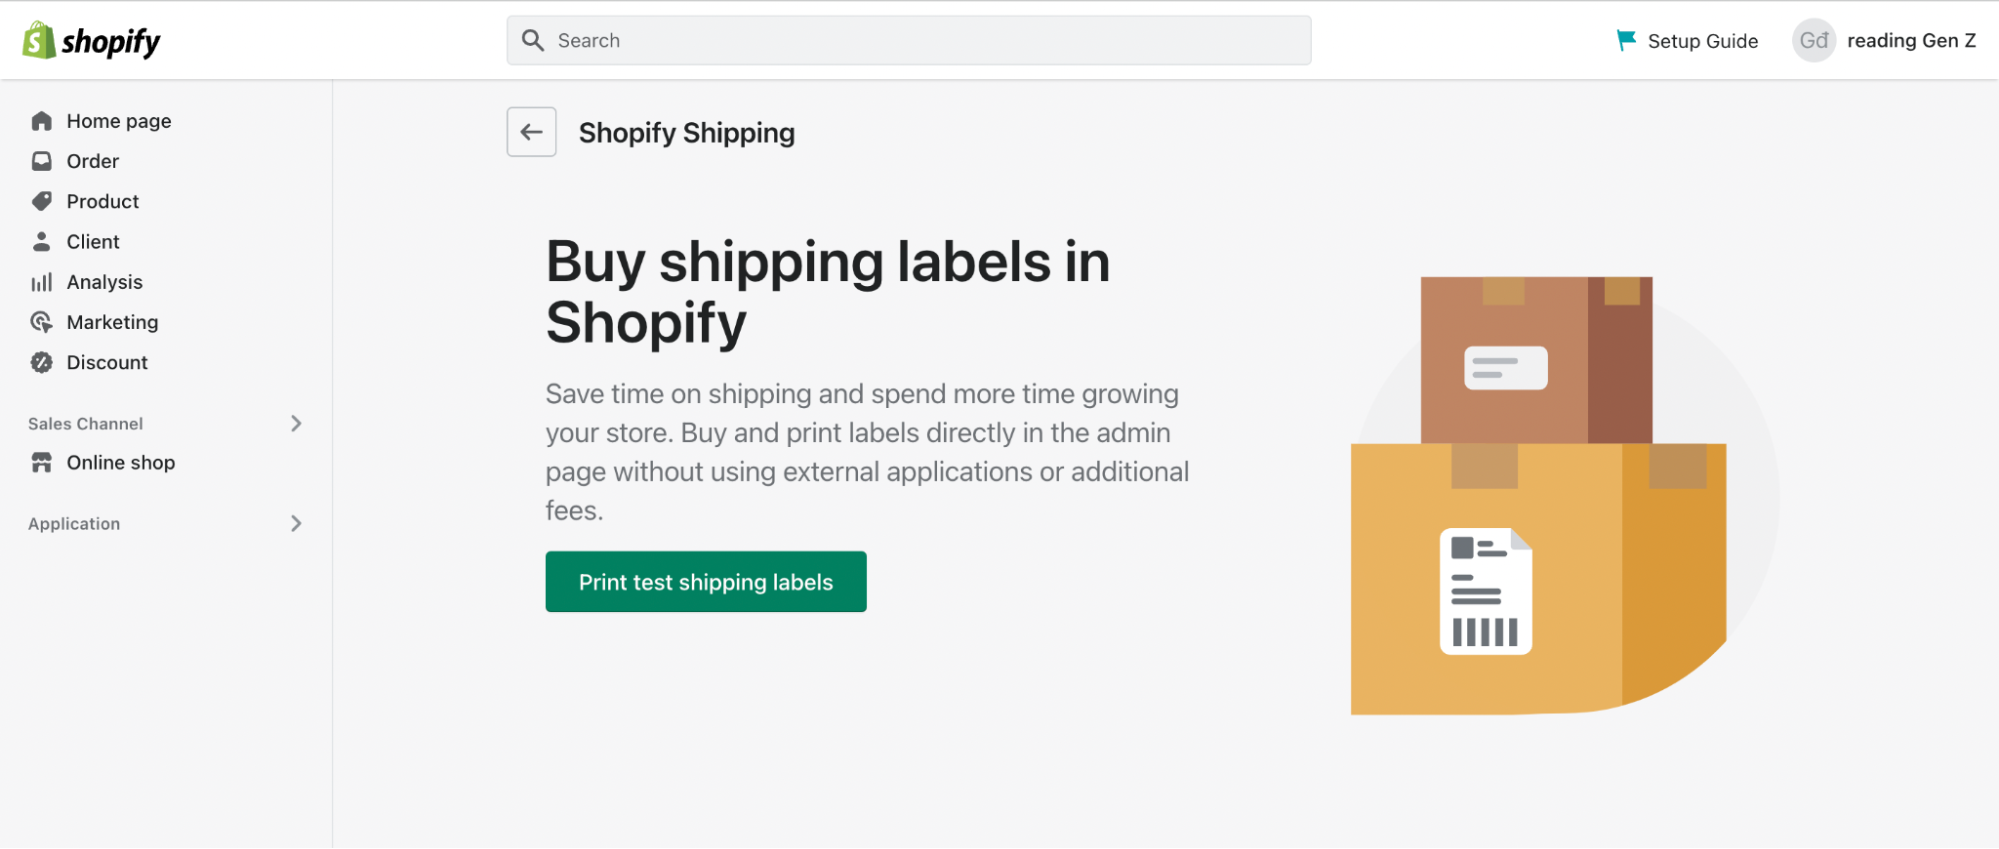 How does Shopify Shipping work 